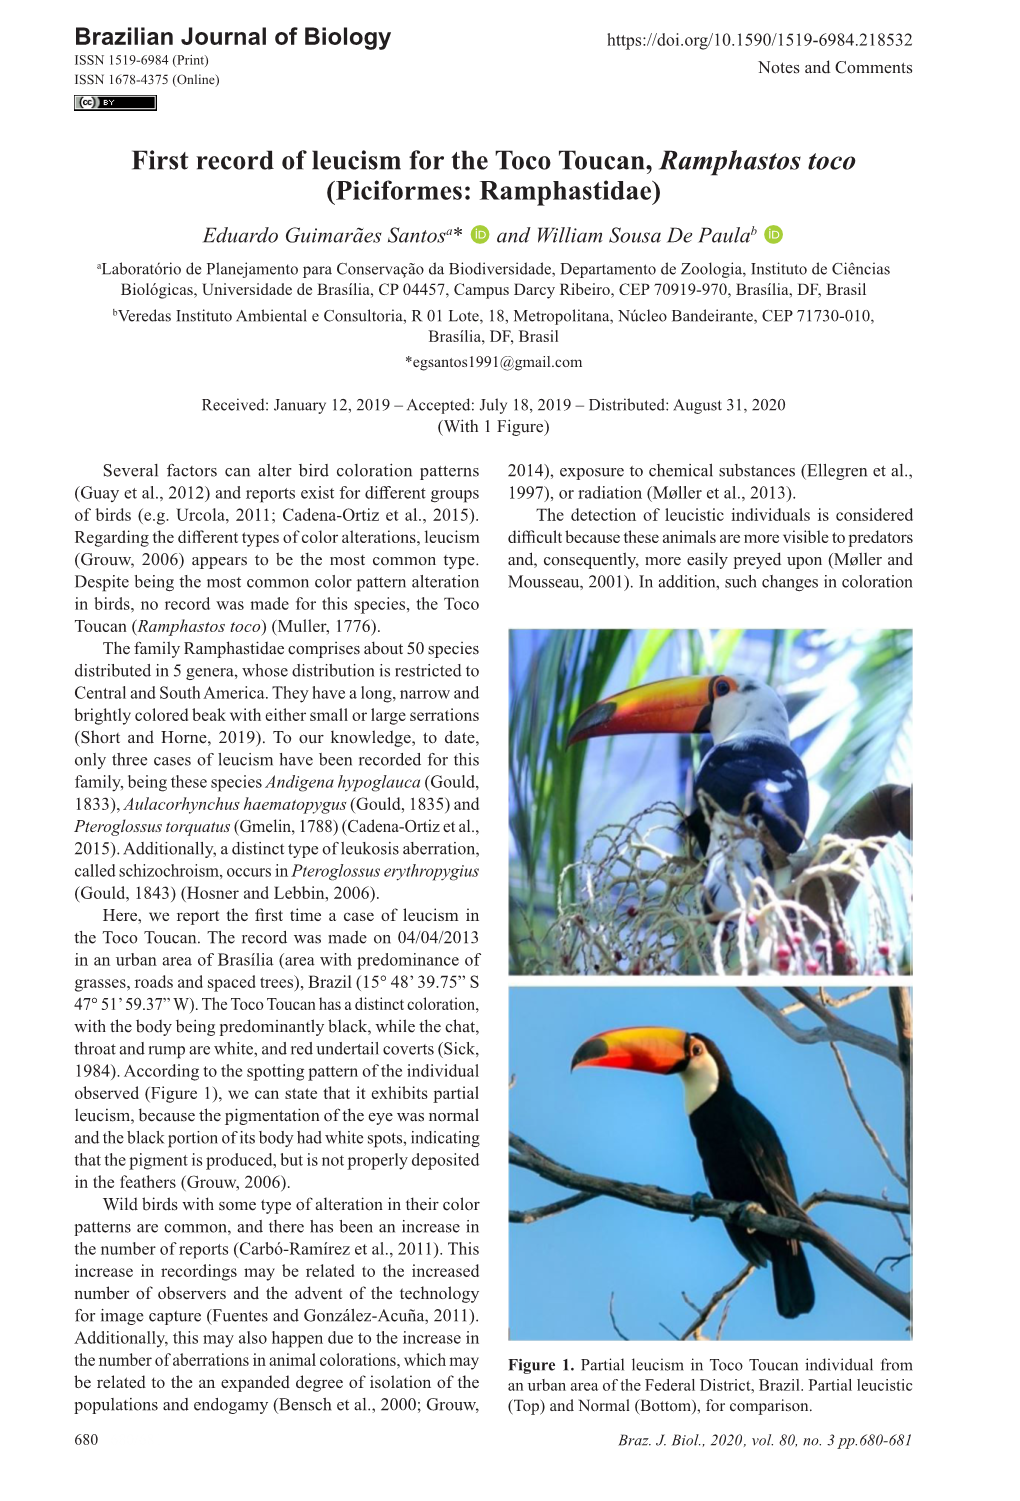 First Record of Leucism for the Toco Toucan, Ramphastos Toco